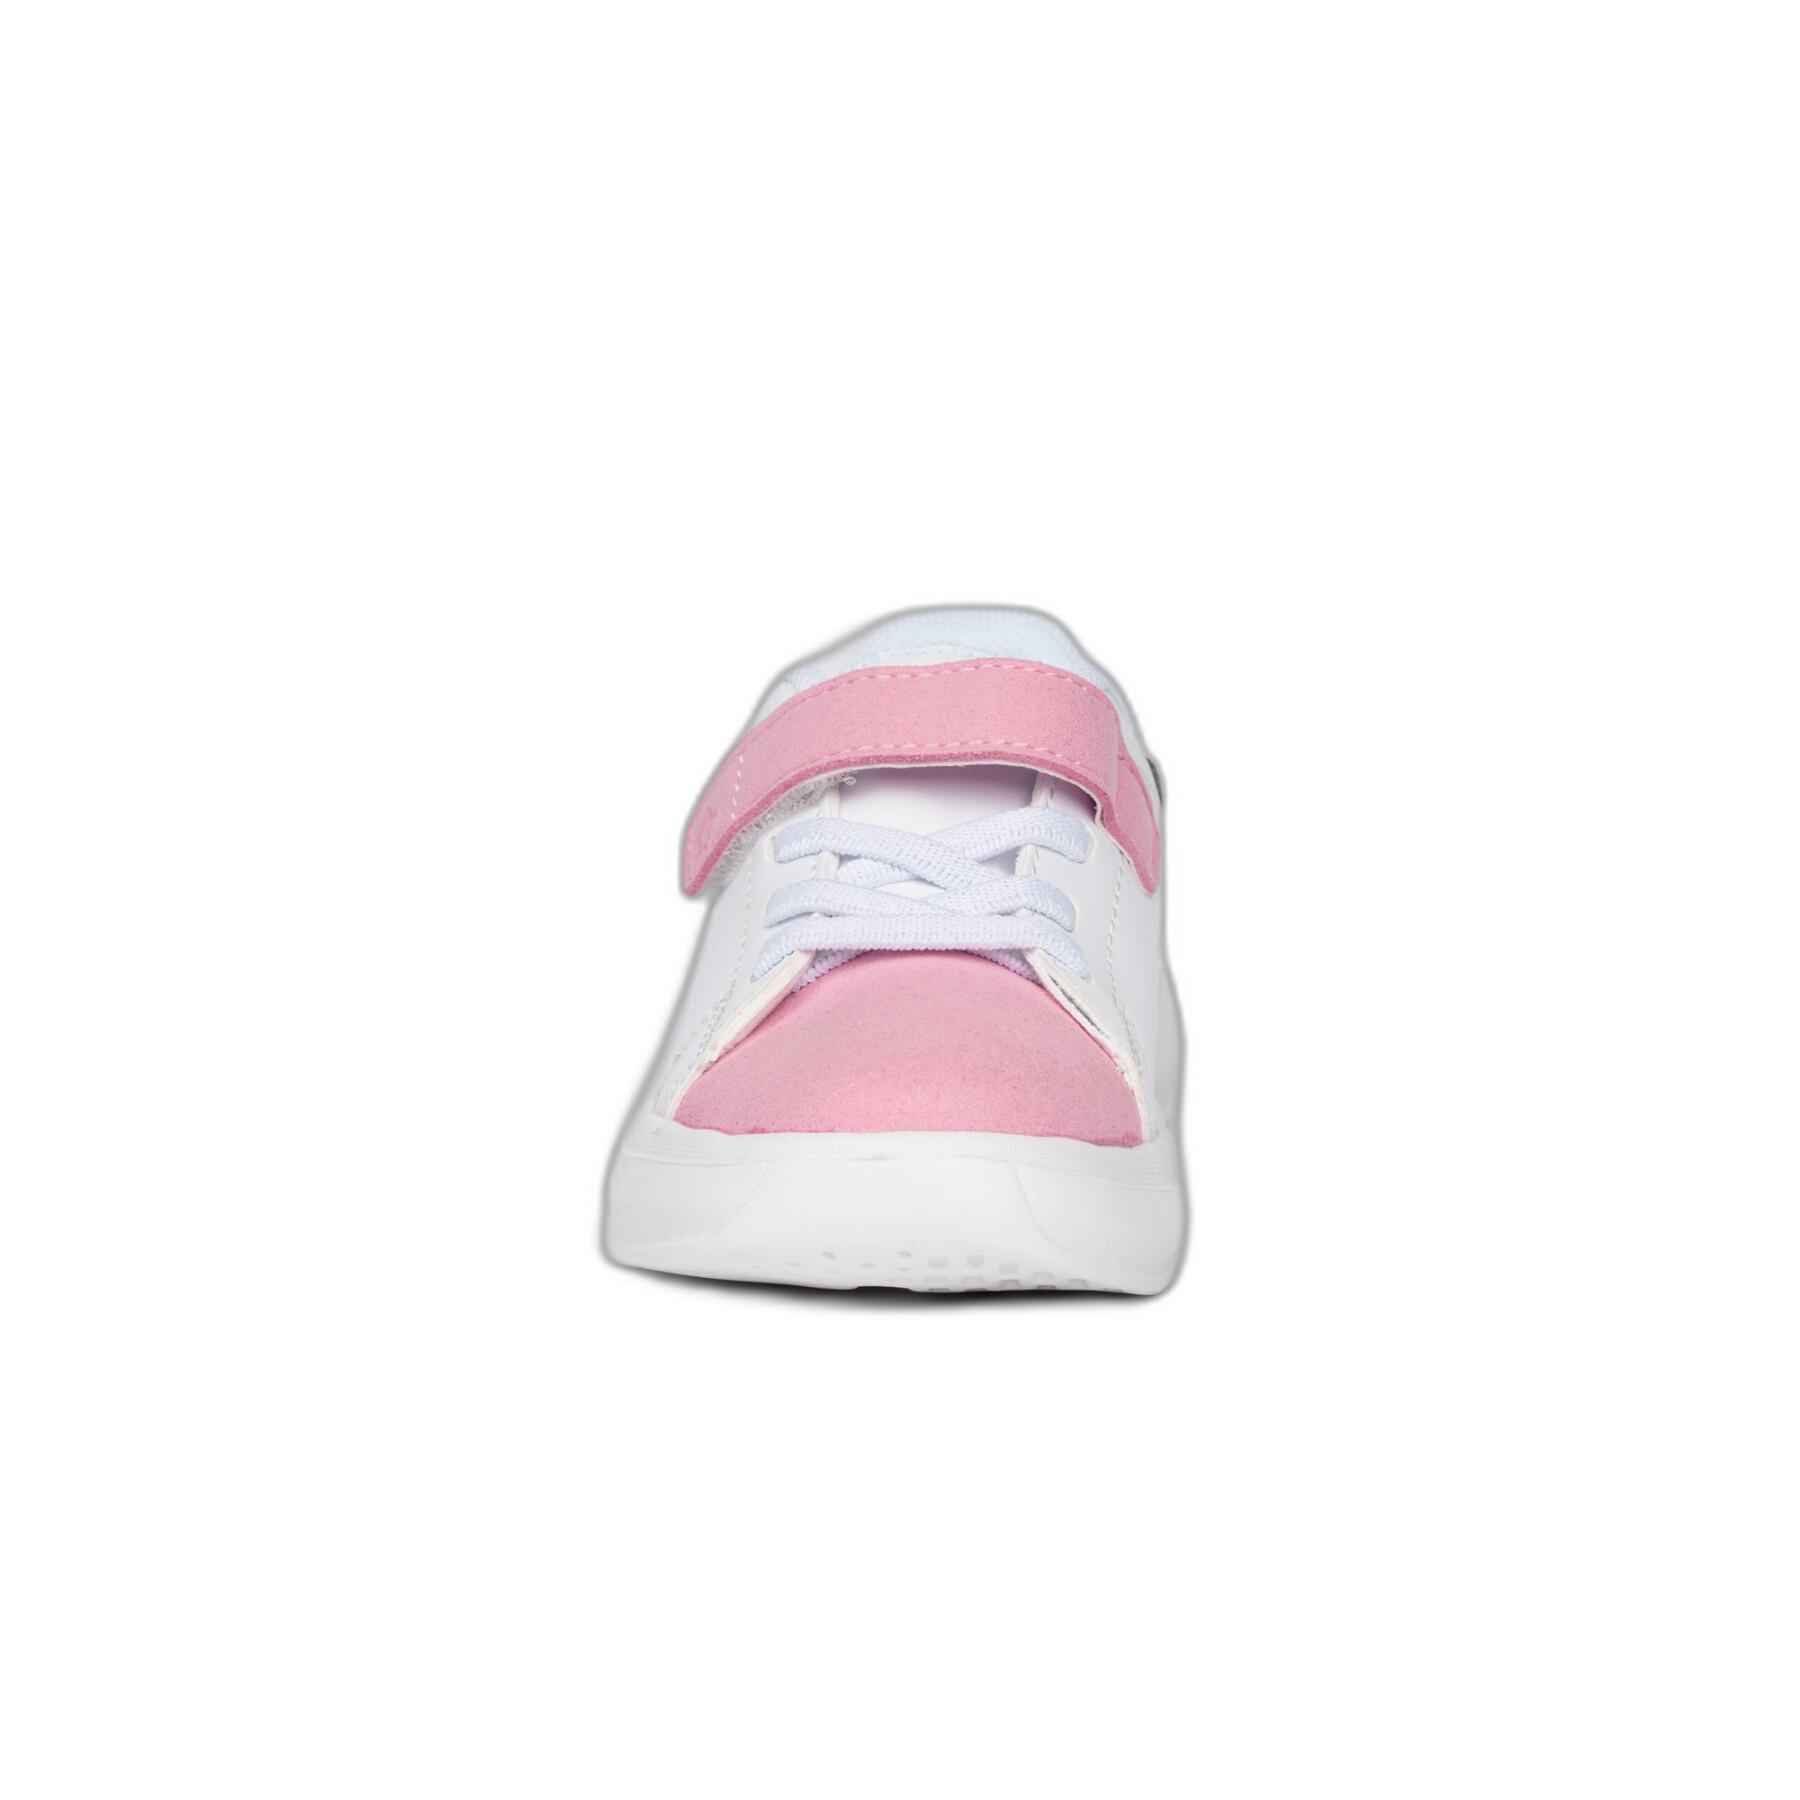 Girl sneakers Kidy Chou First